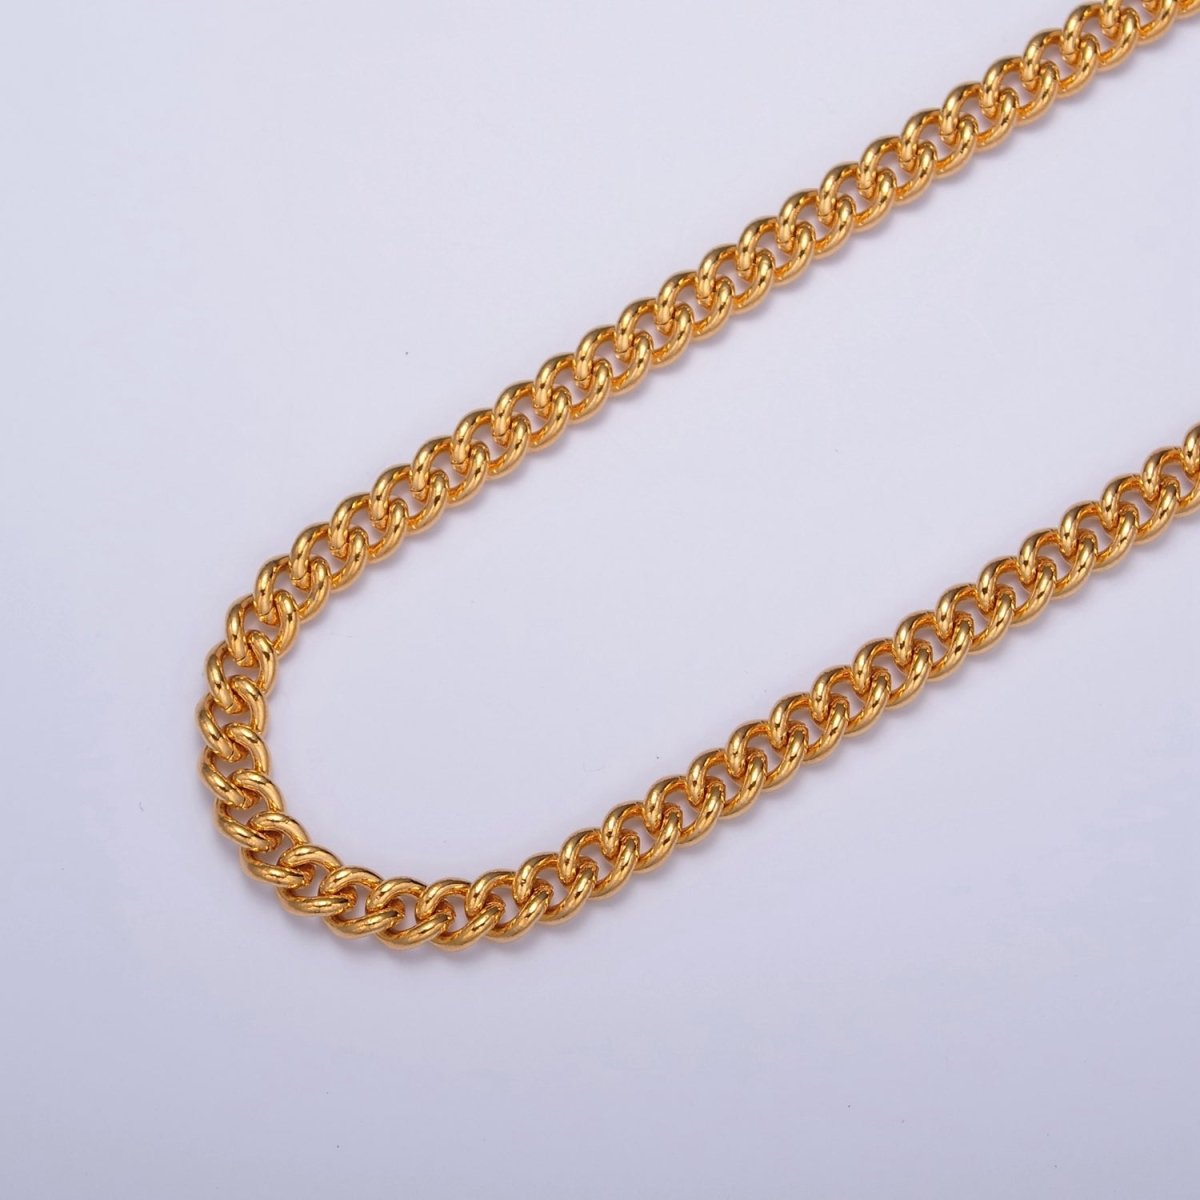 Thick Curb Link Unfinished Chain, 6mm 24k Gold Filled Chain 19.5 inch long | WA-1397 Clearance Pricing - DLUXCA